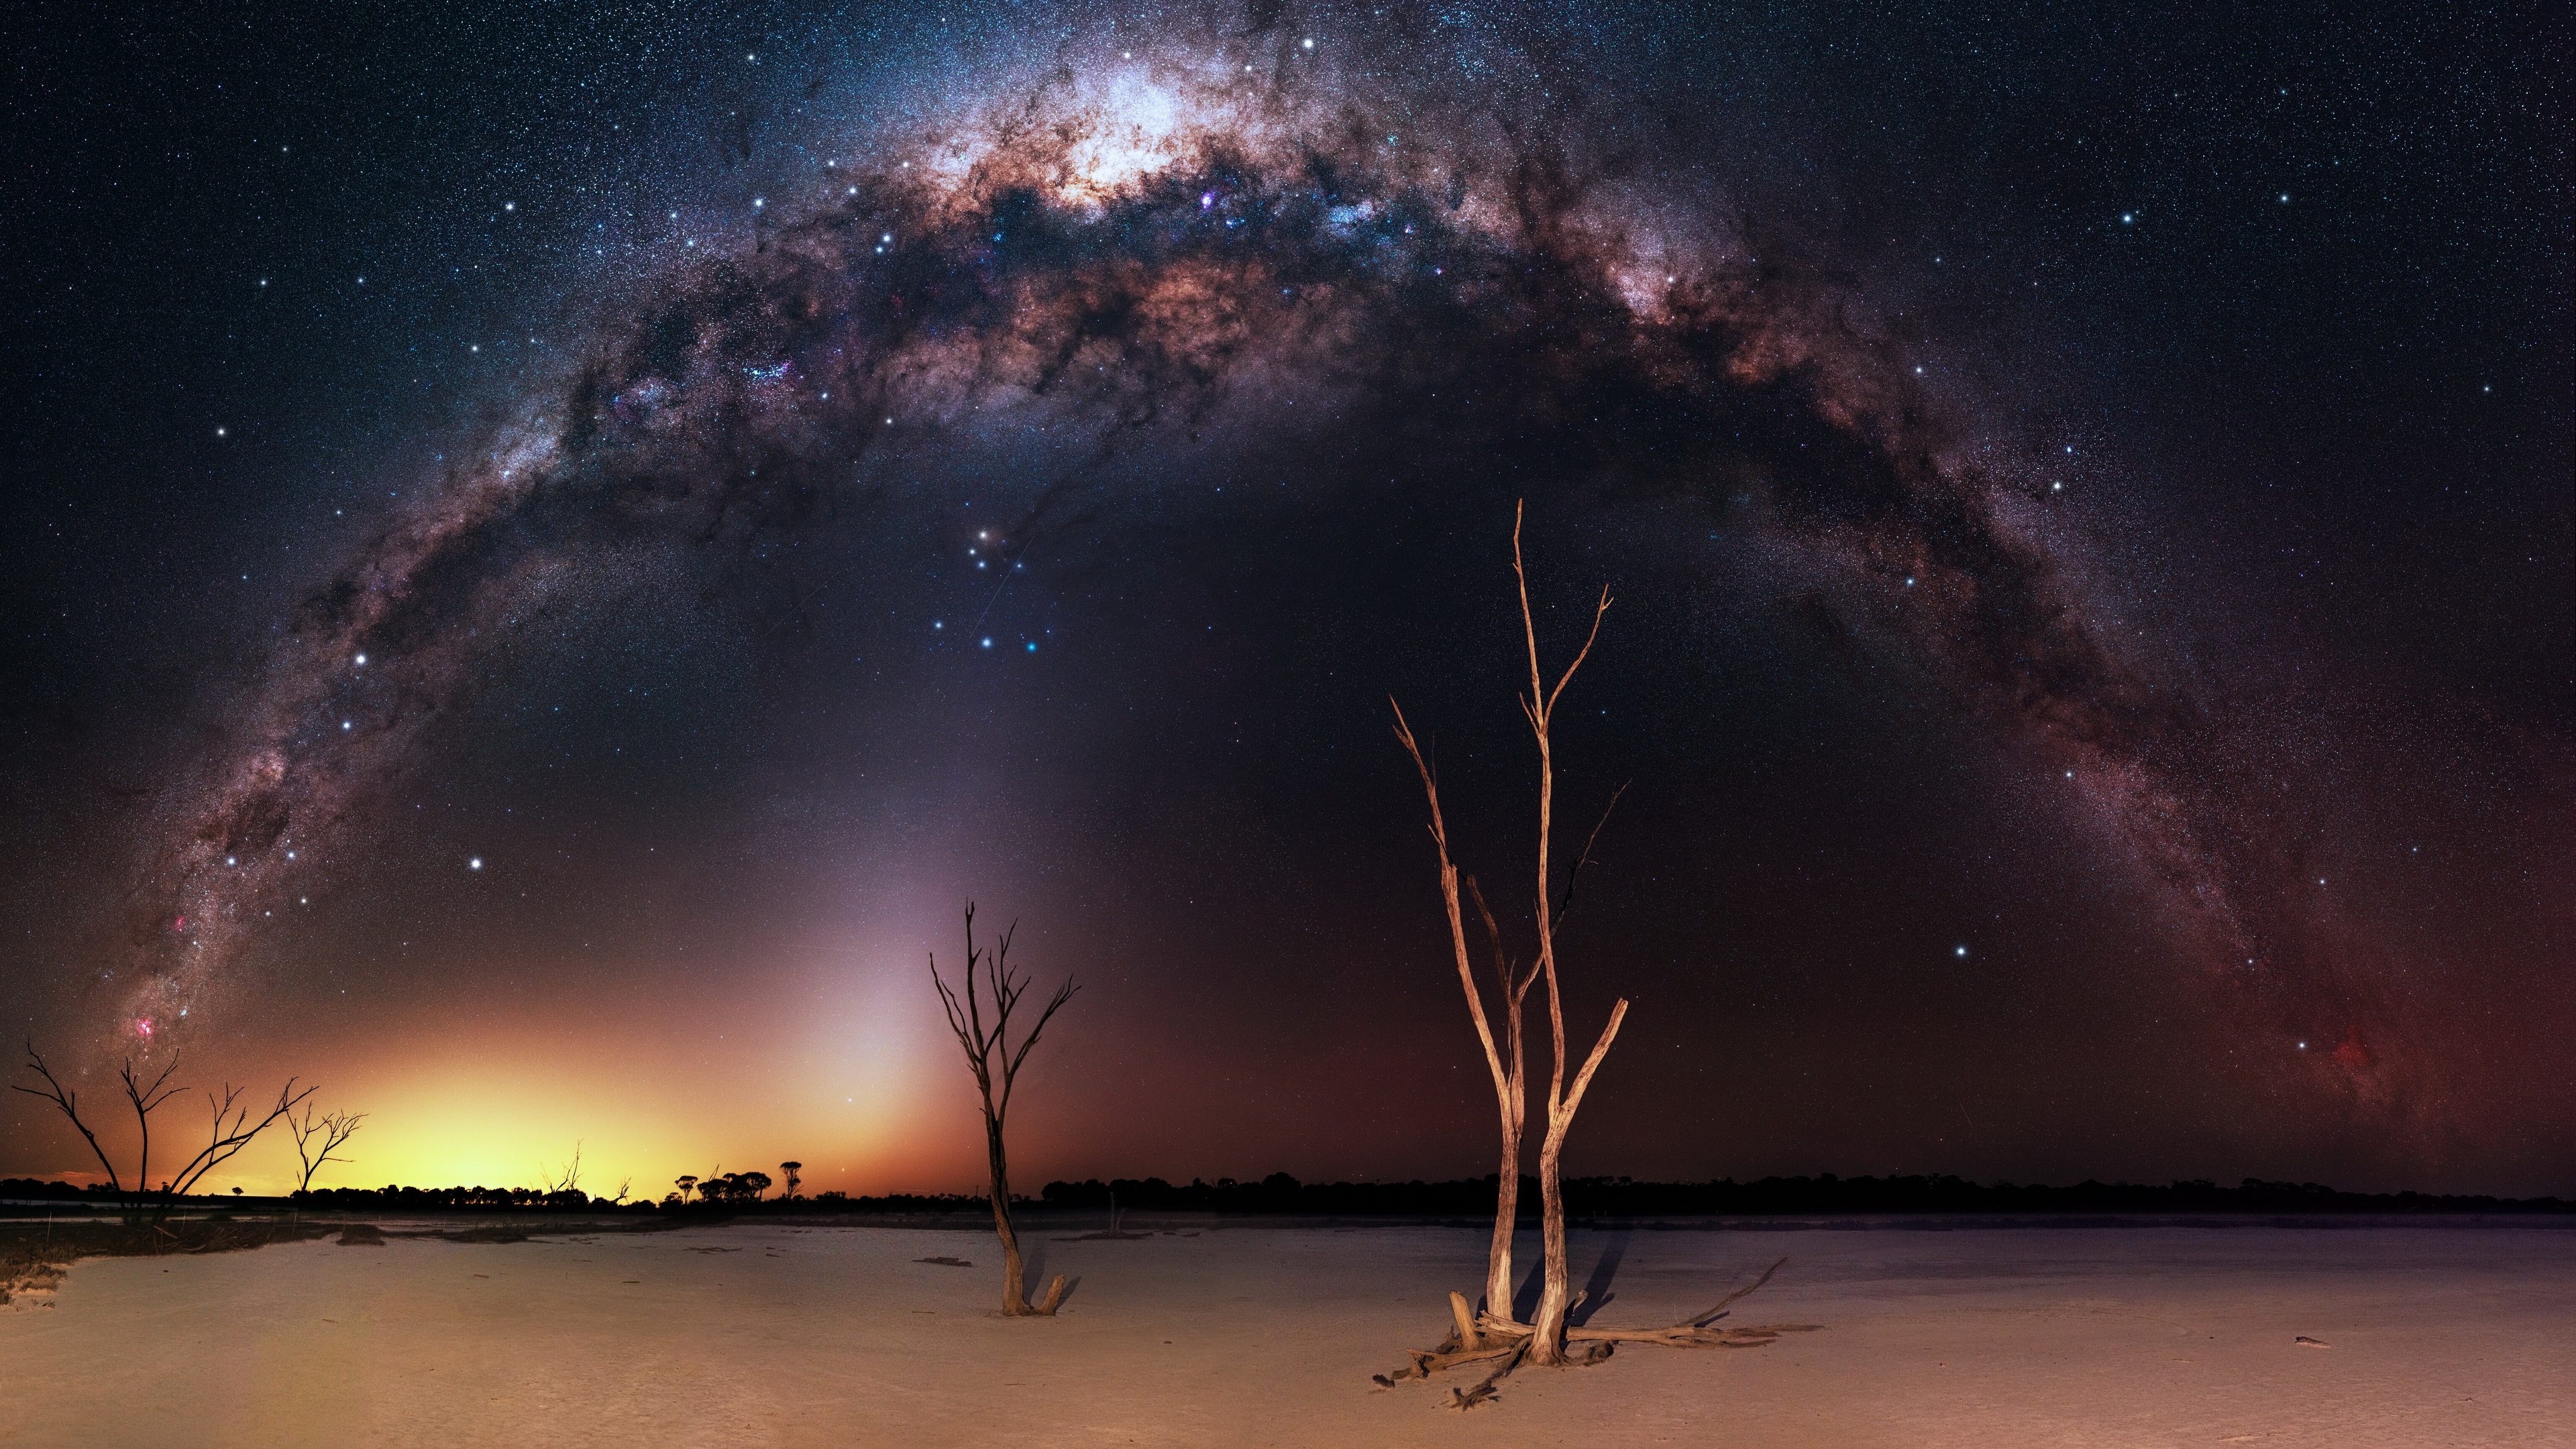 5003854 milky way, universe, nature, photography, hd, 4k, 5k - Rare Gallery  HD Wallpapers